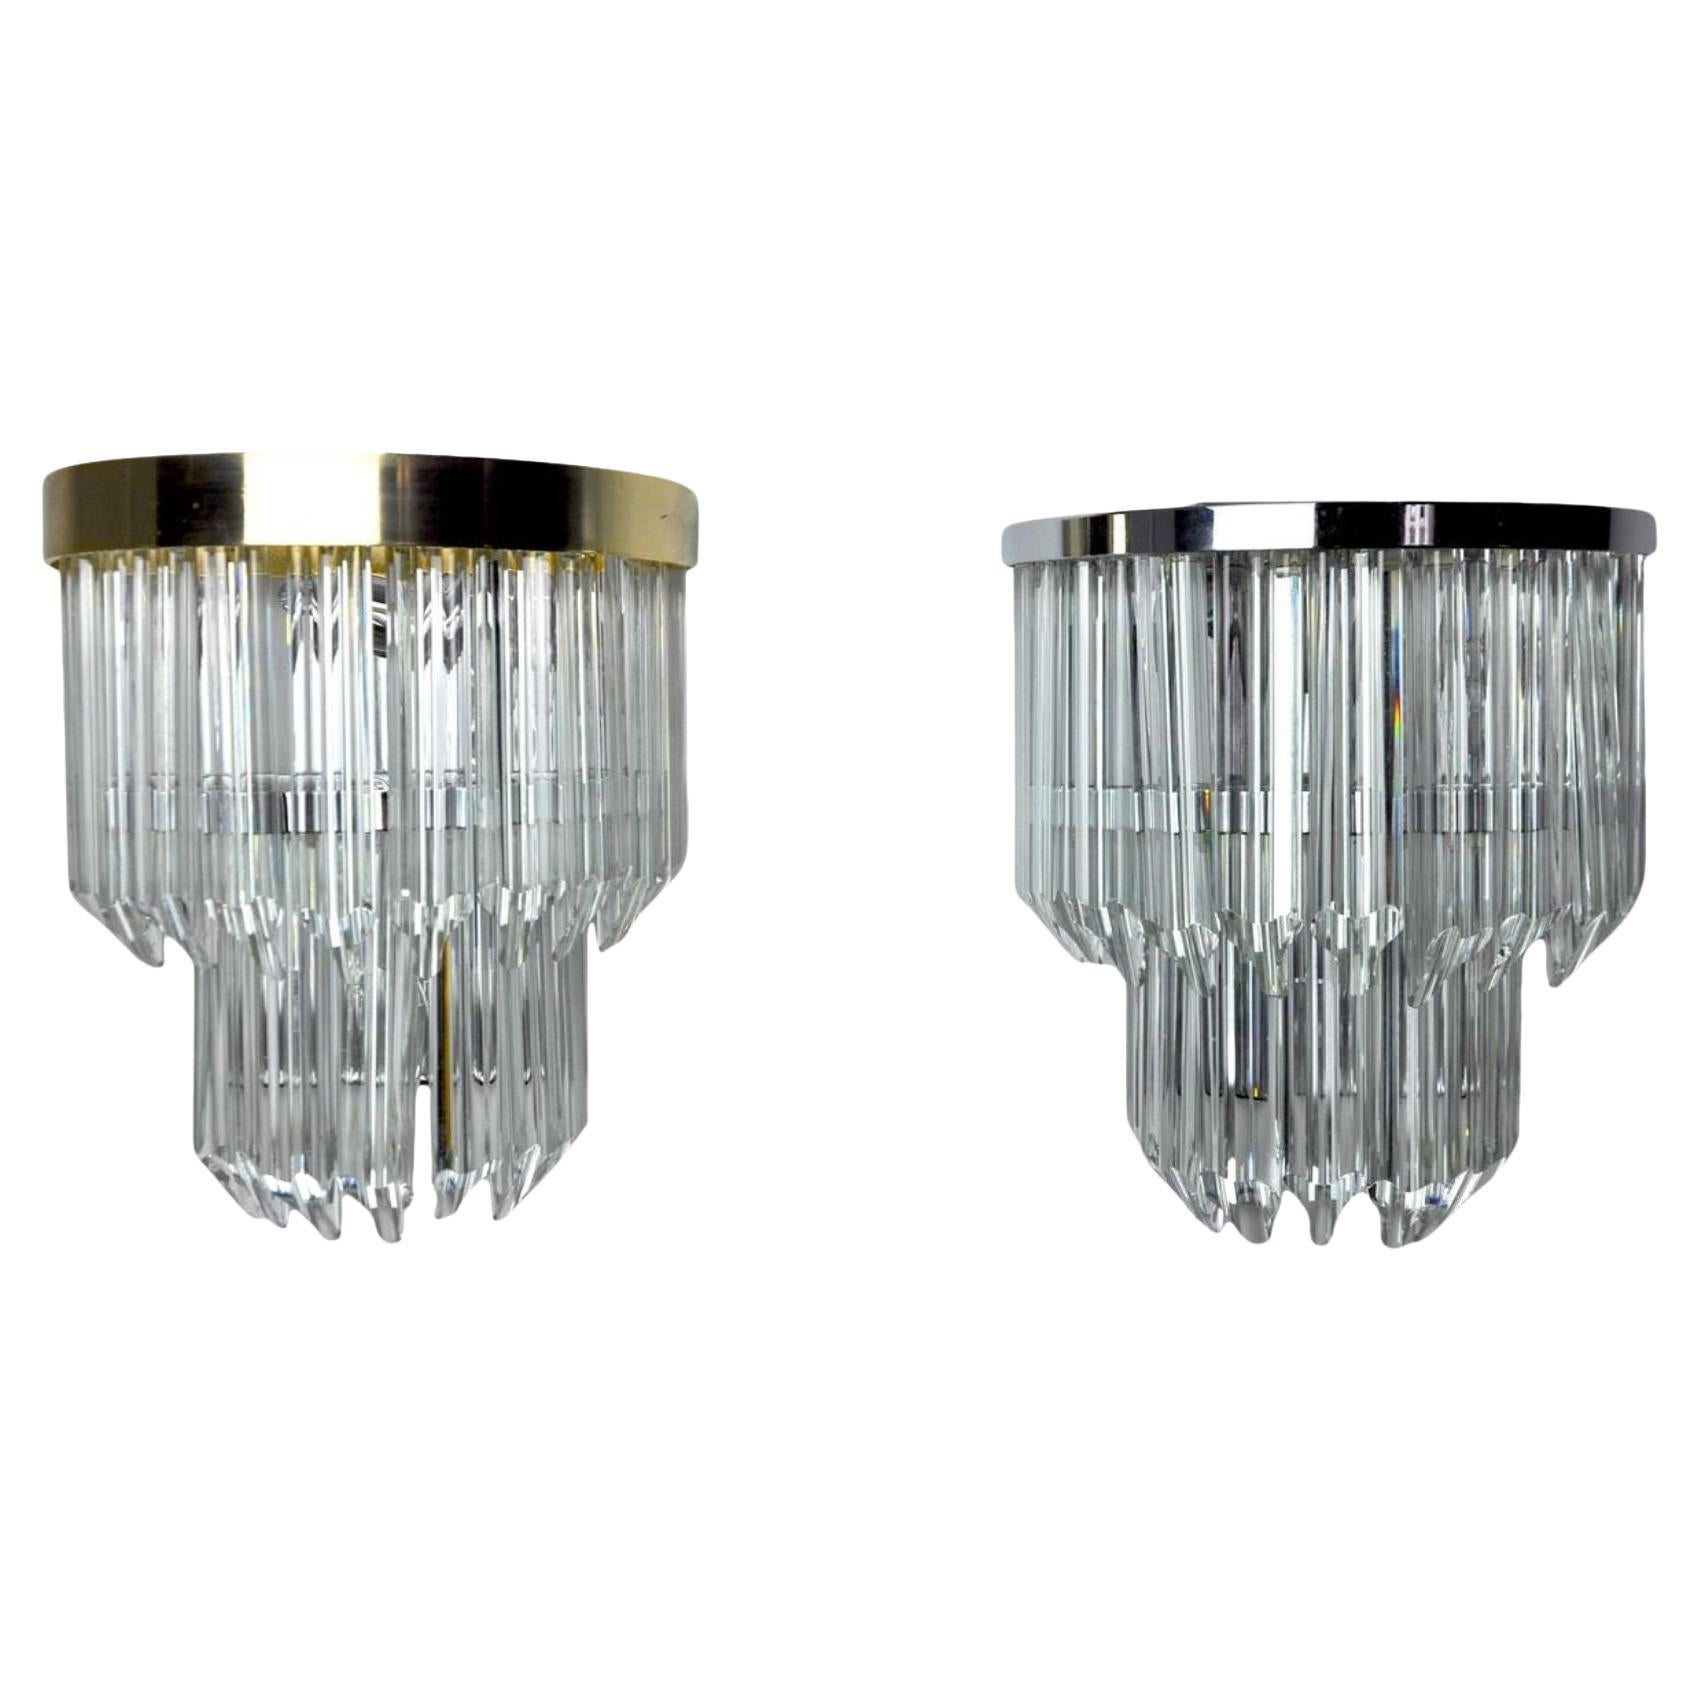 1970s Paolo Venini Chrome and Glass Sconces, Italy, a Pair For Sale